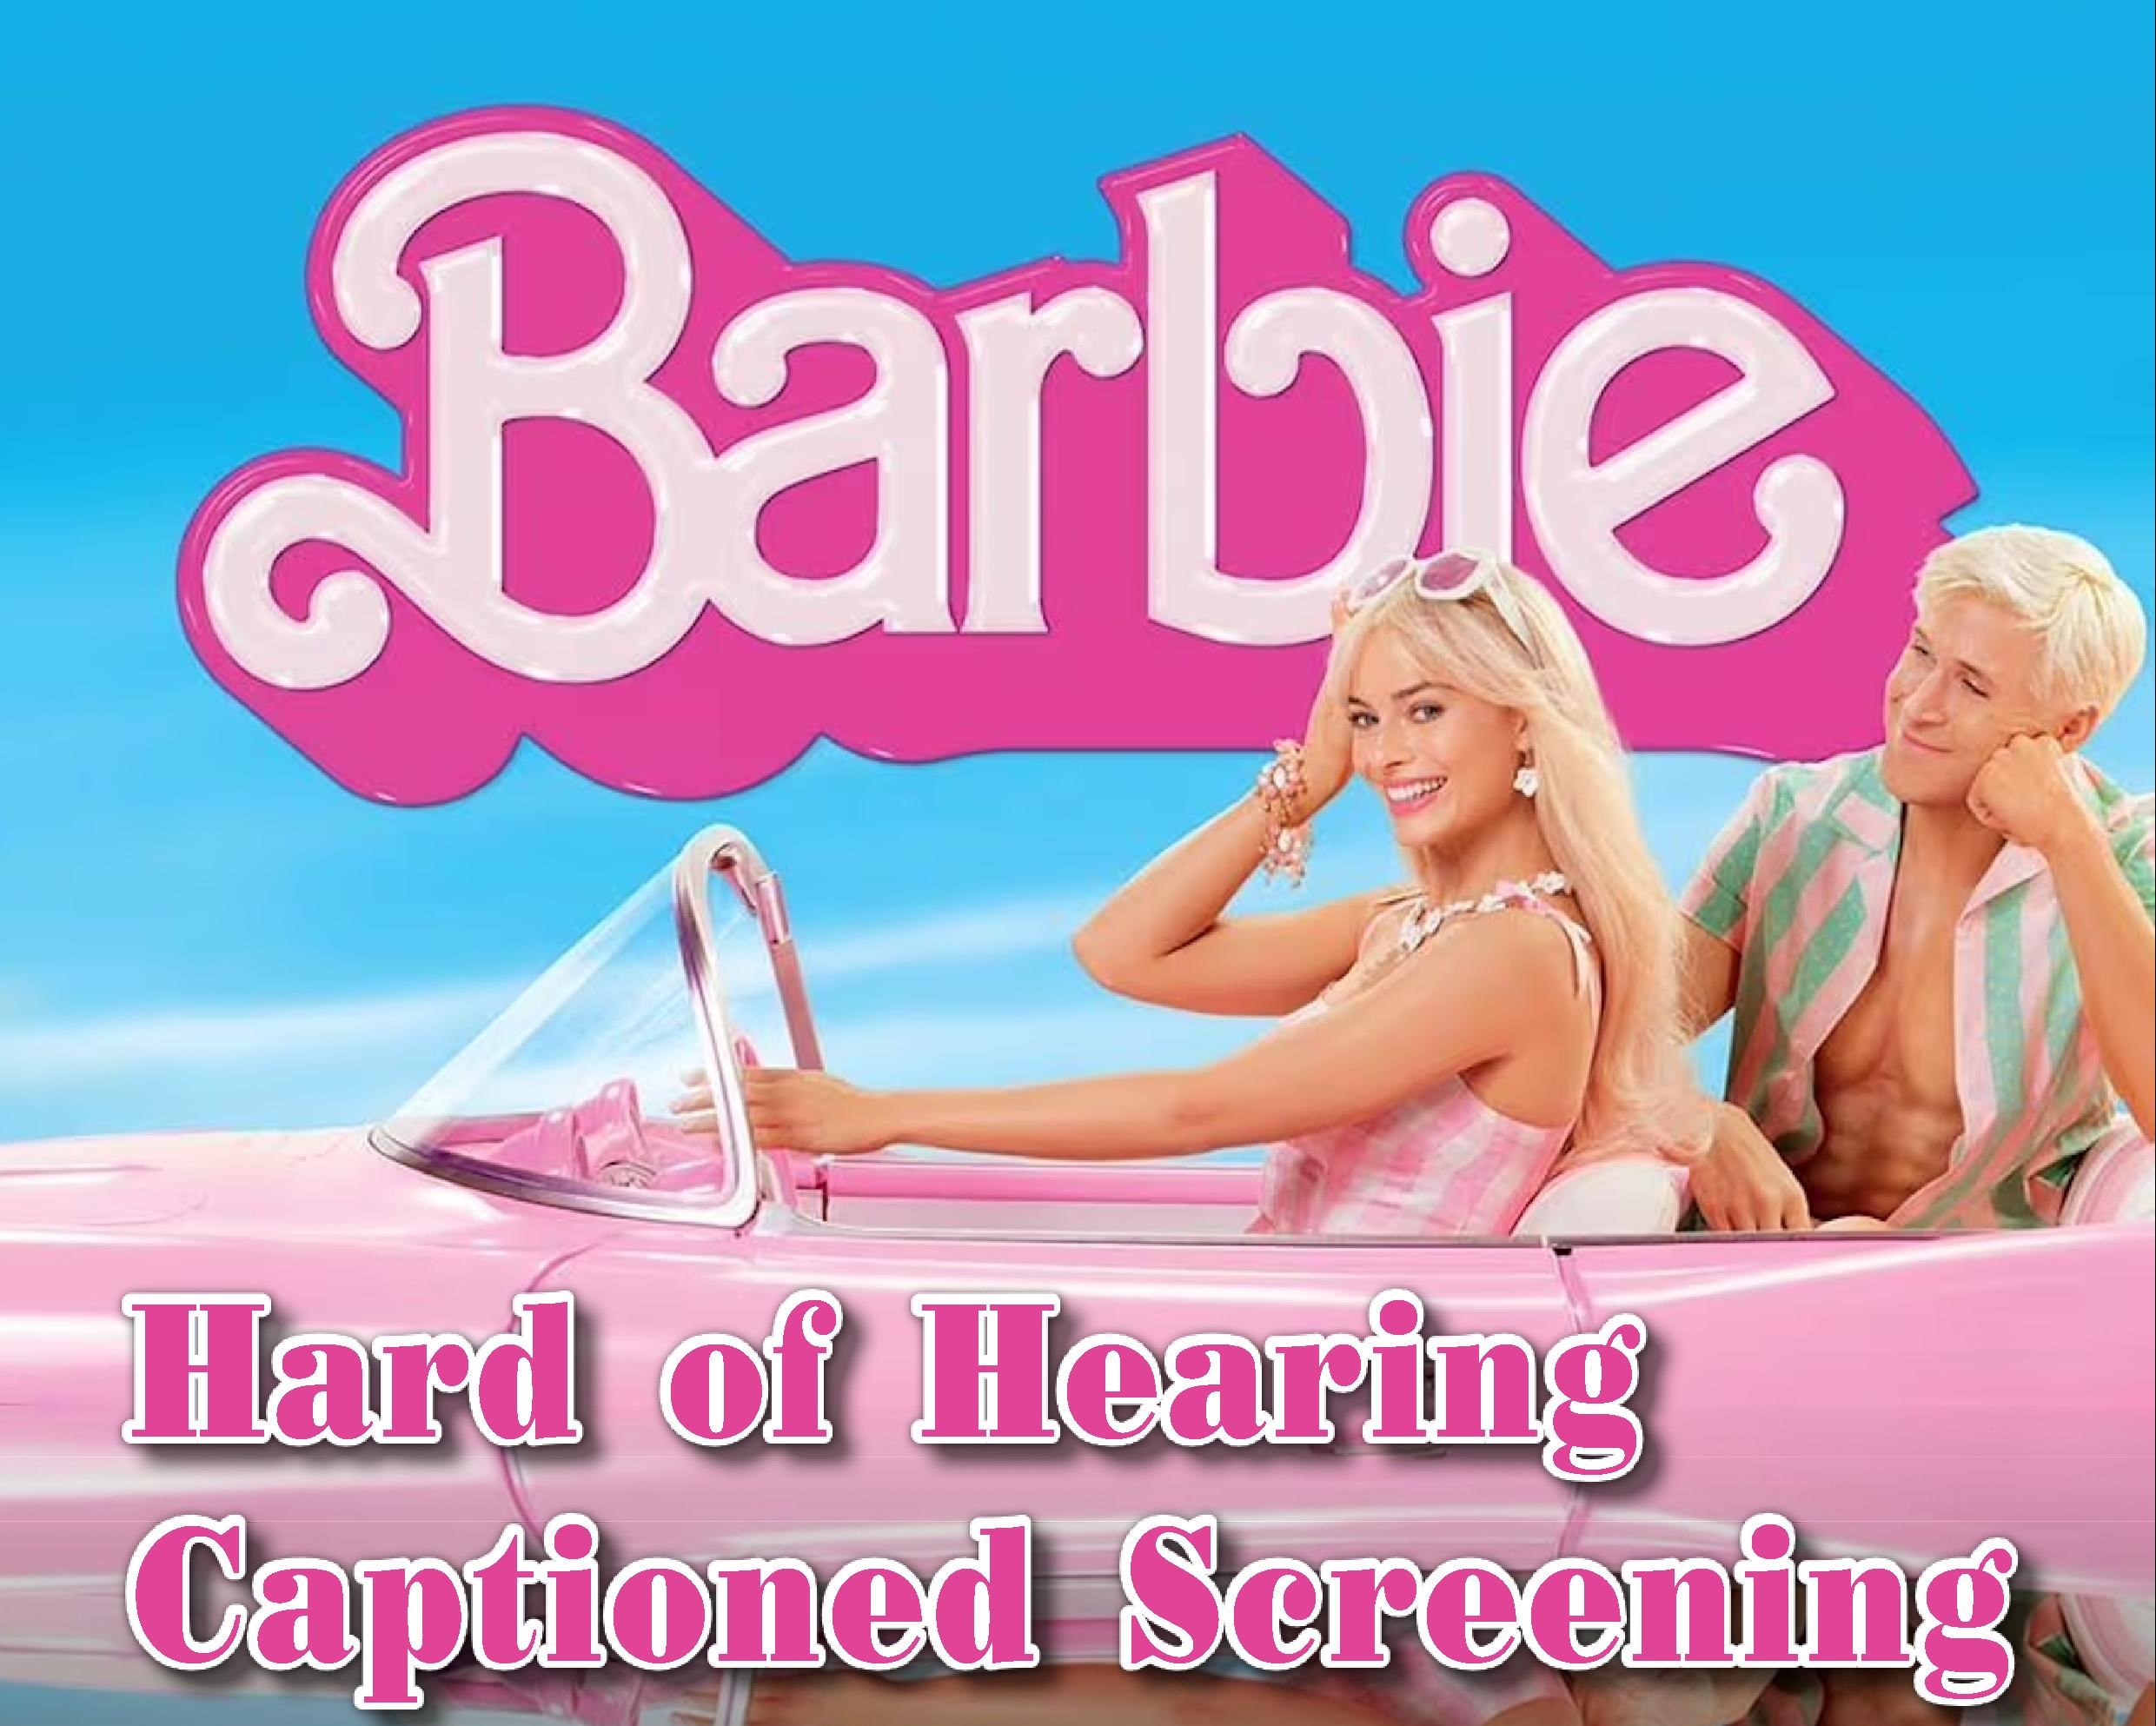 Barbie File advert stating hard of hearing captioned showing